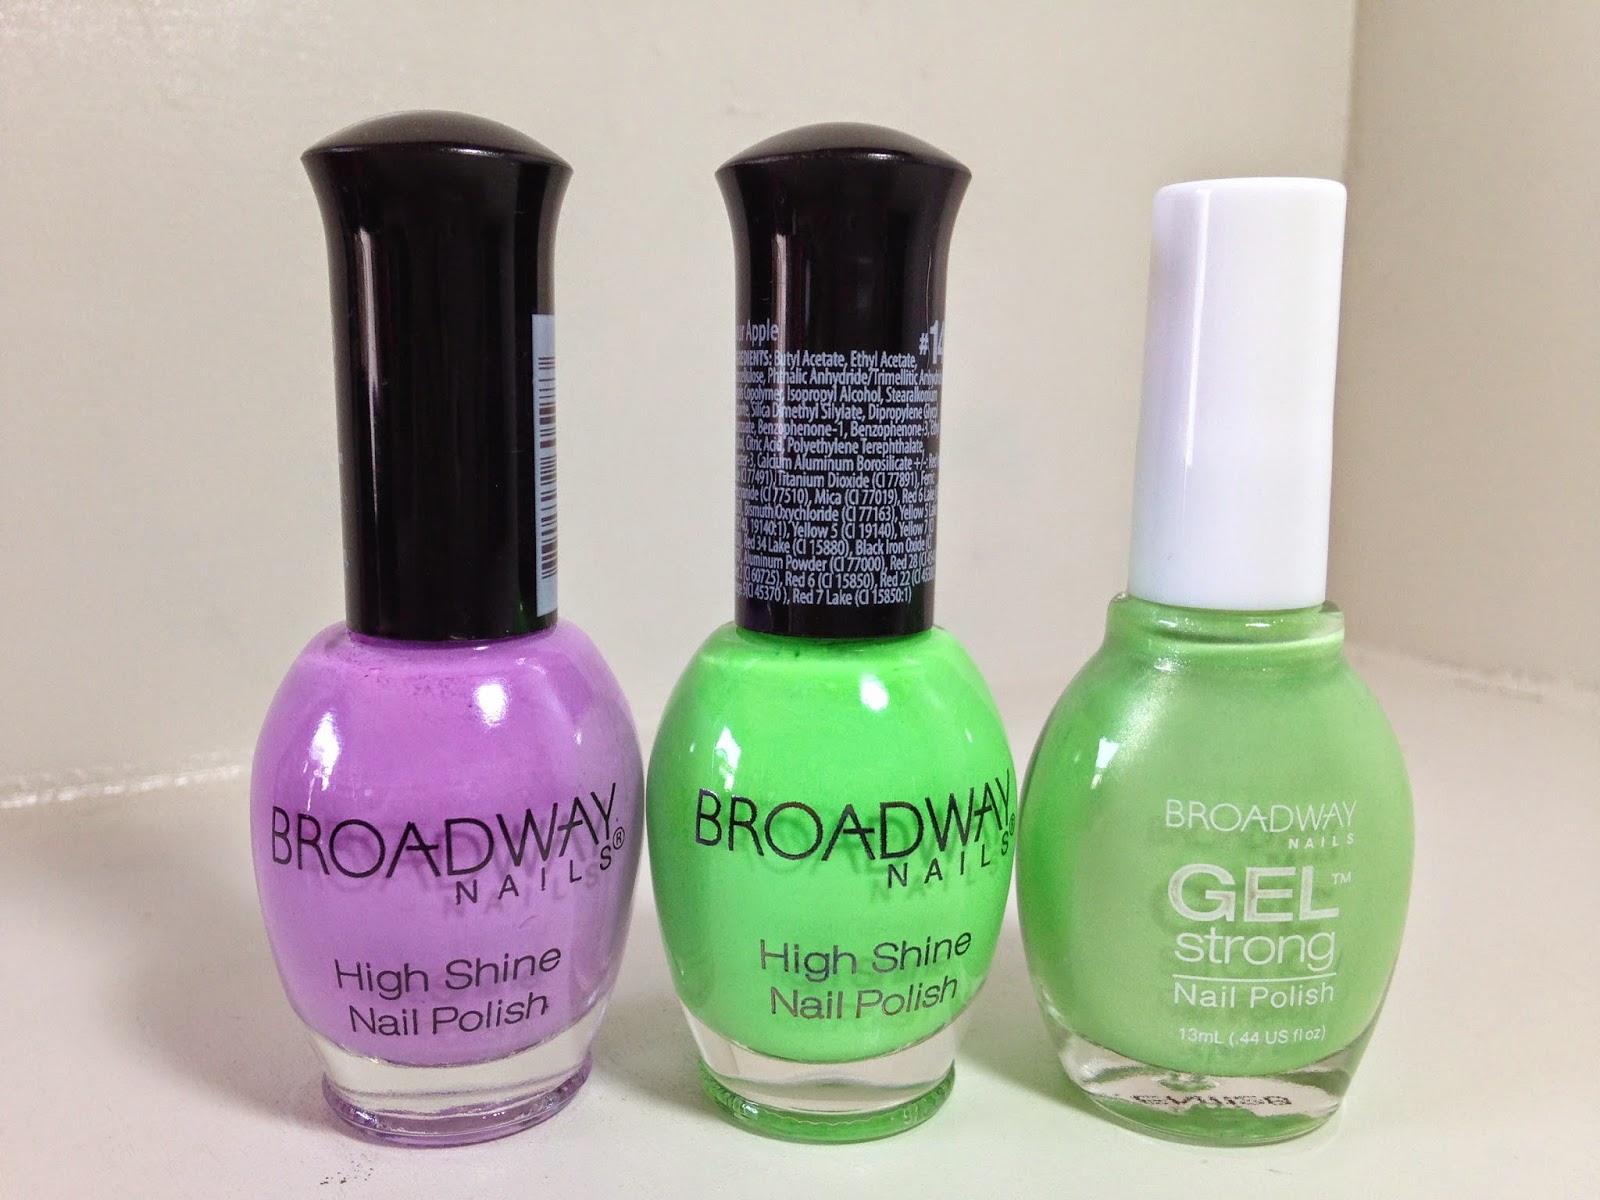 Broadway Gel Strong Nail Polish Color Swatches - wide 6